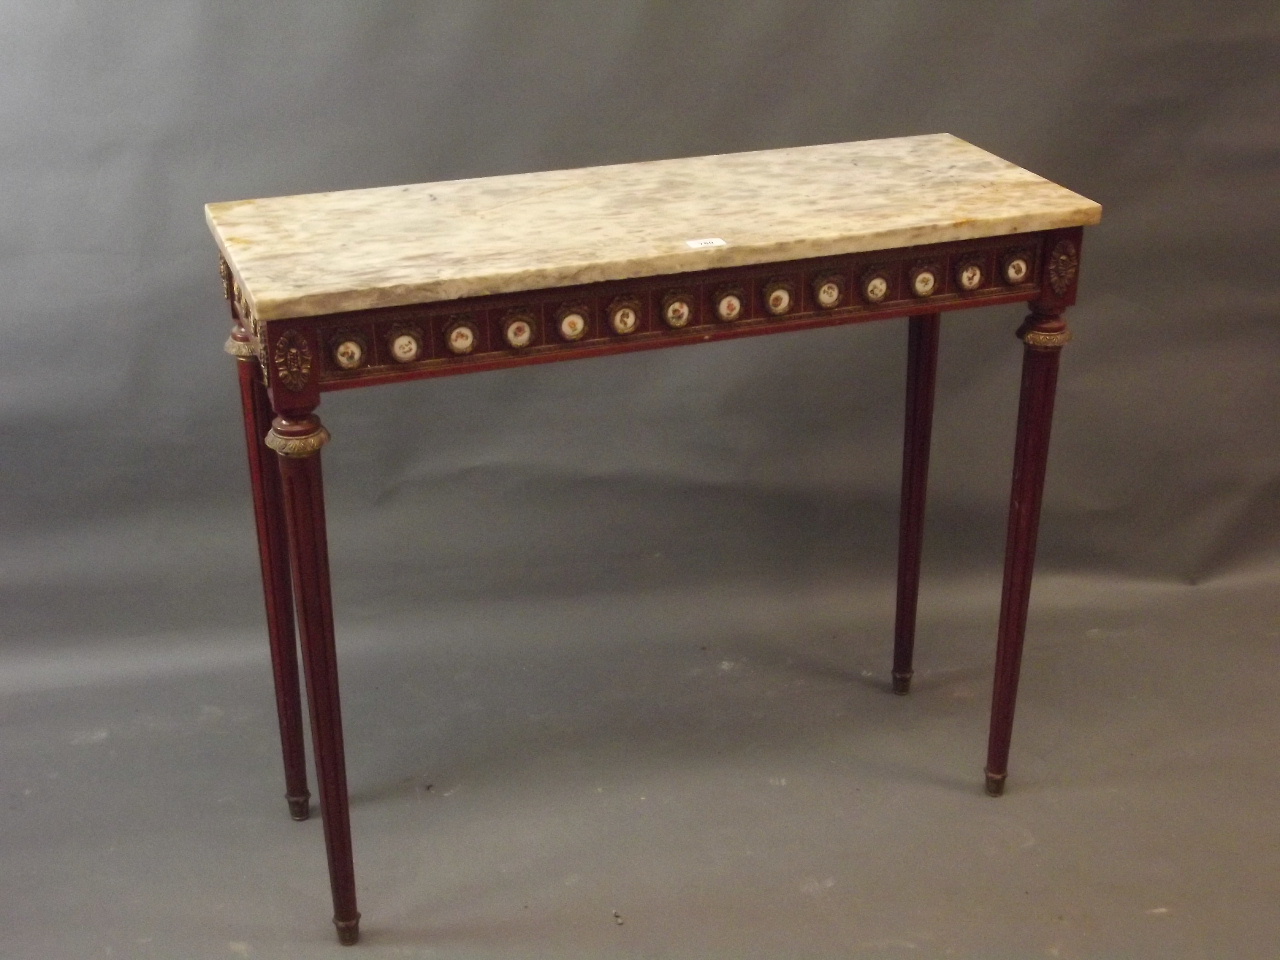 A French style mahogany and brass mounted console table with marble top and frieze comprising - Image 2 of 3